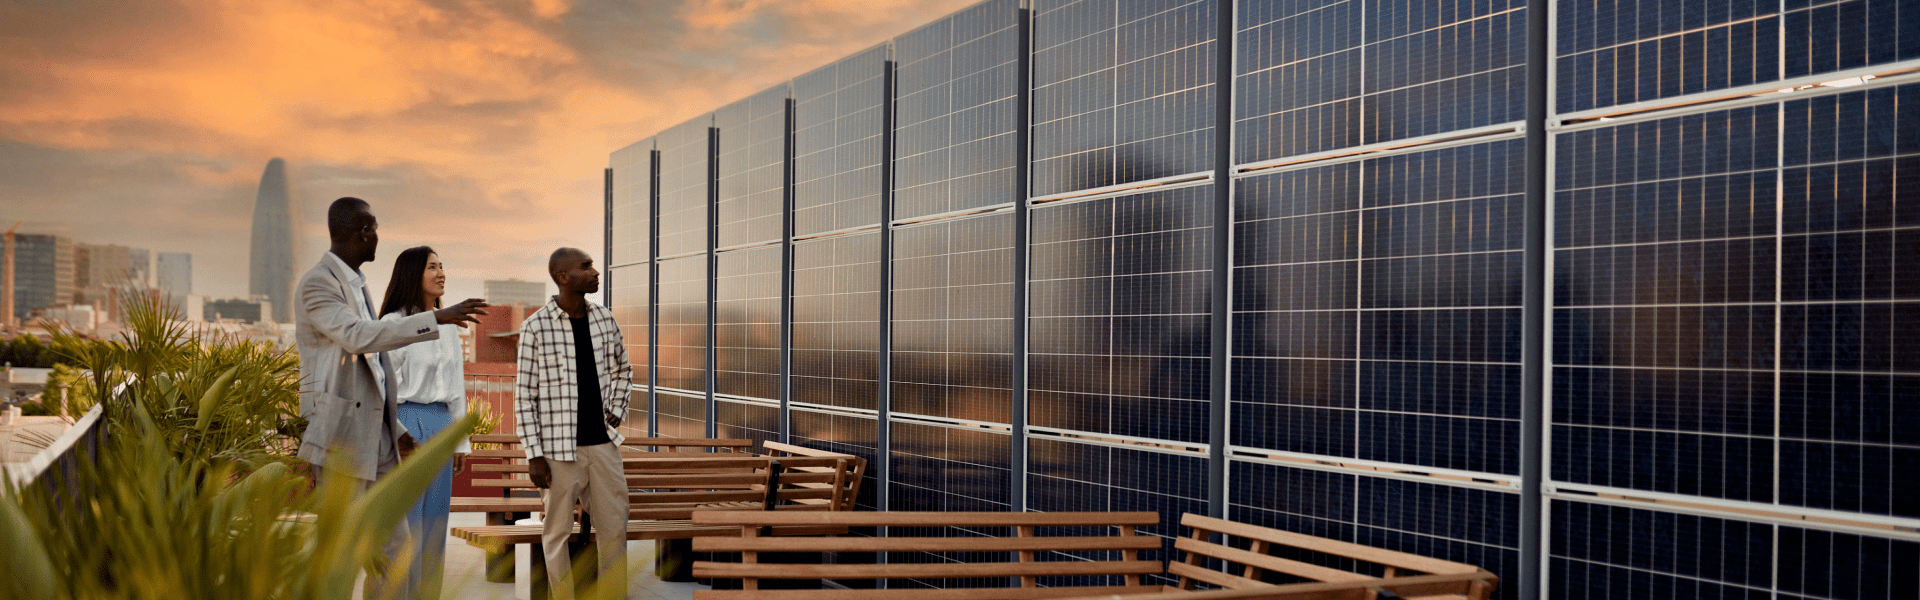 Solar panel as sustainable energy sources